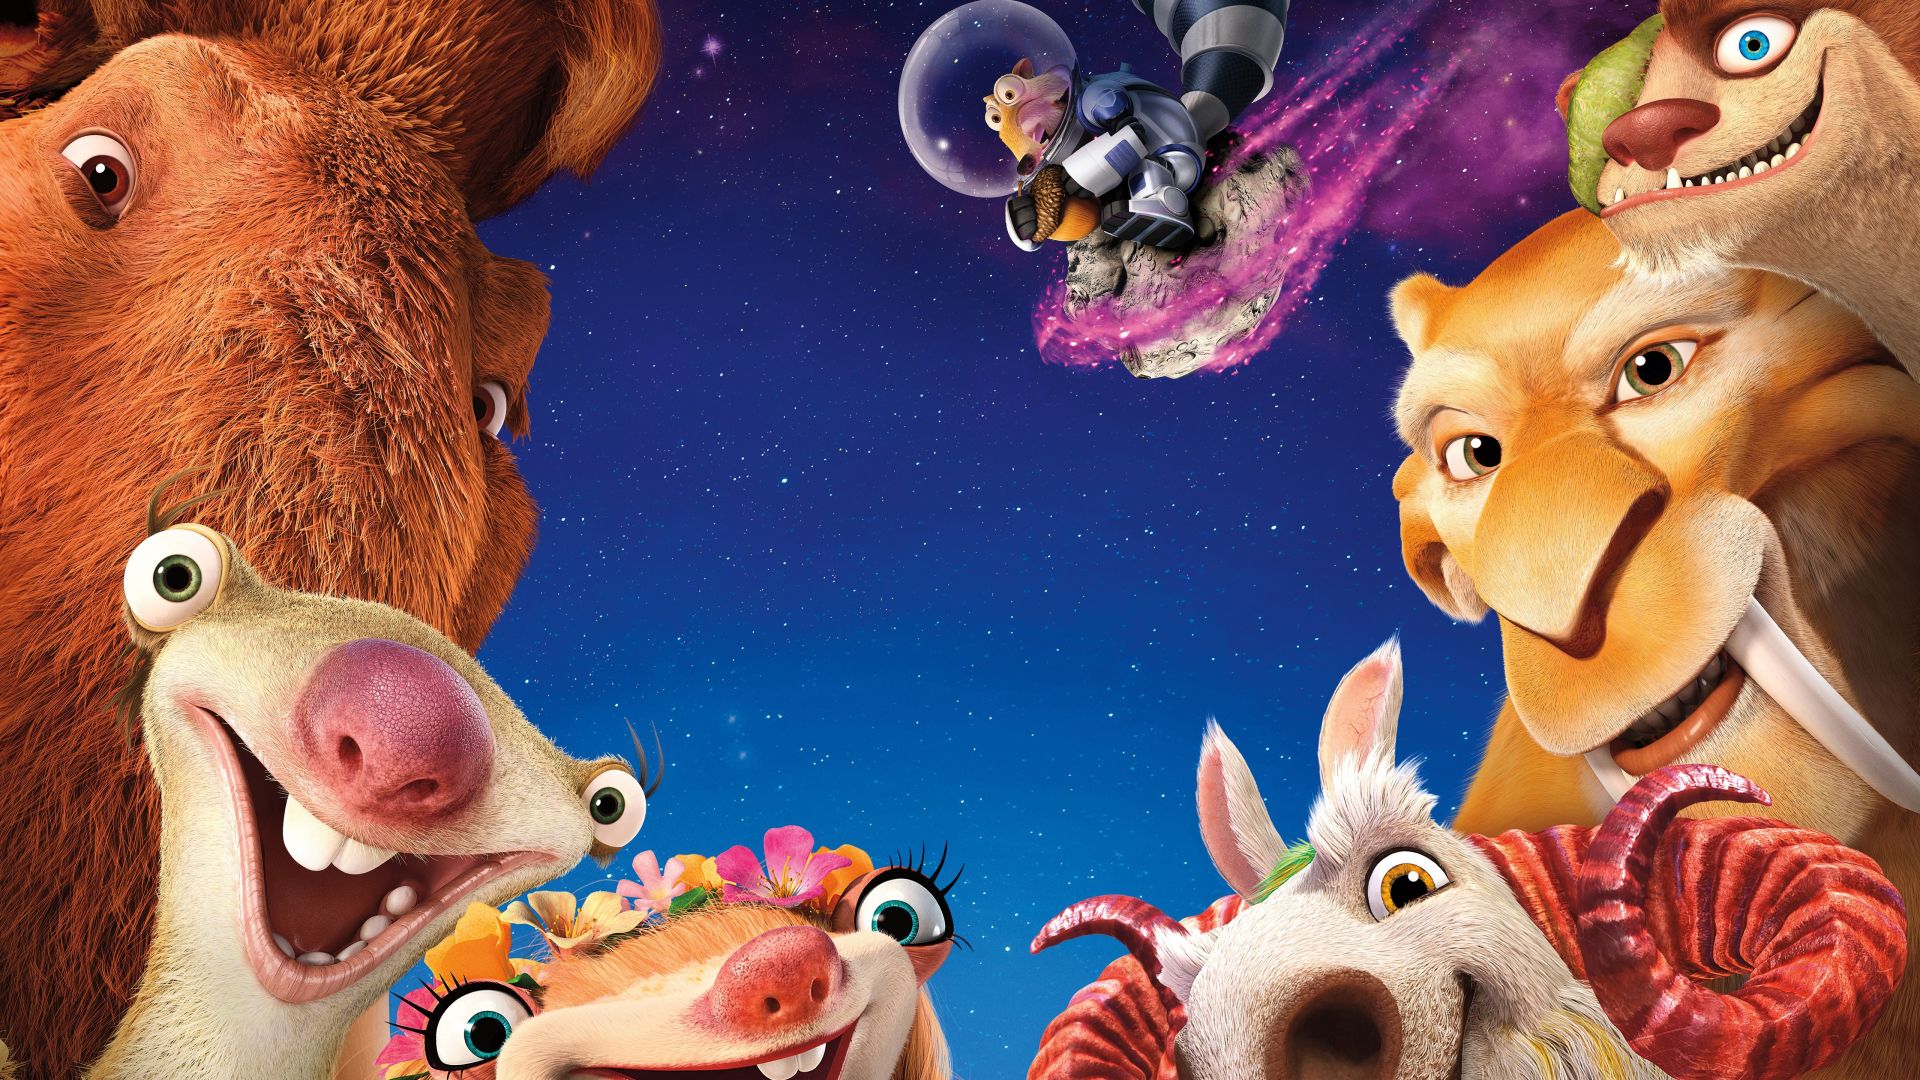 Download Ice Age 5 Collision Course diego manny scrat sid